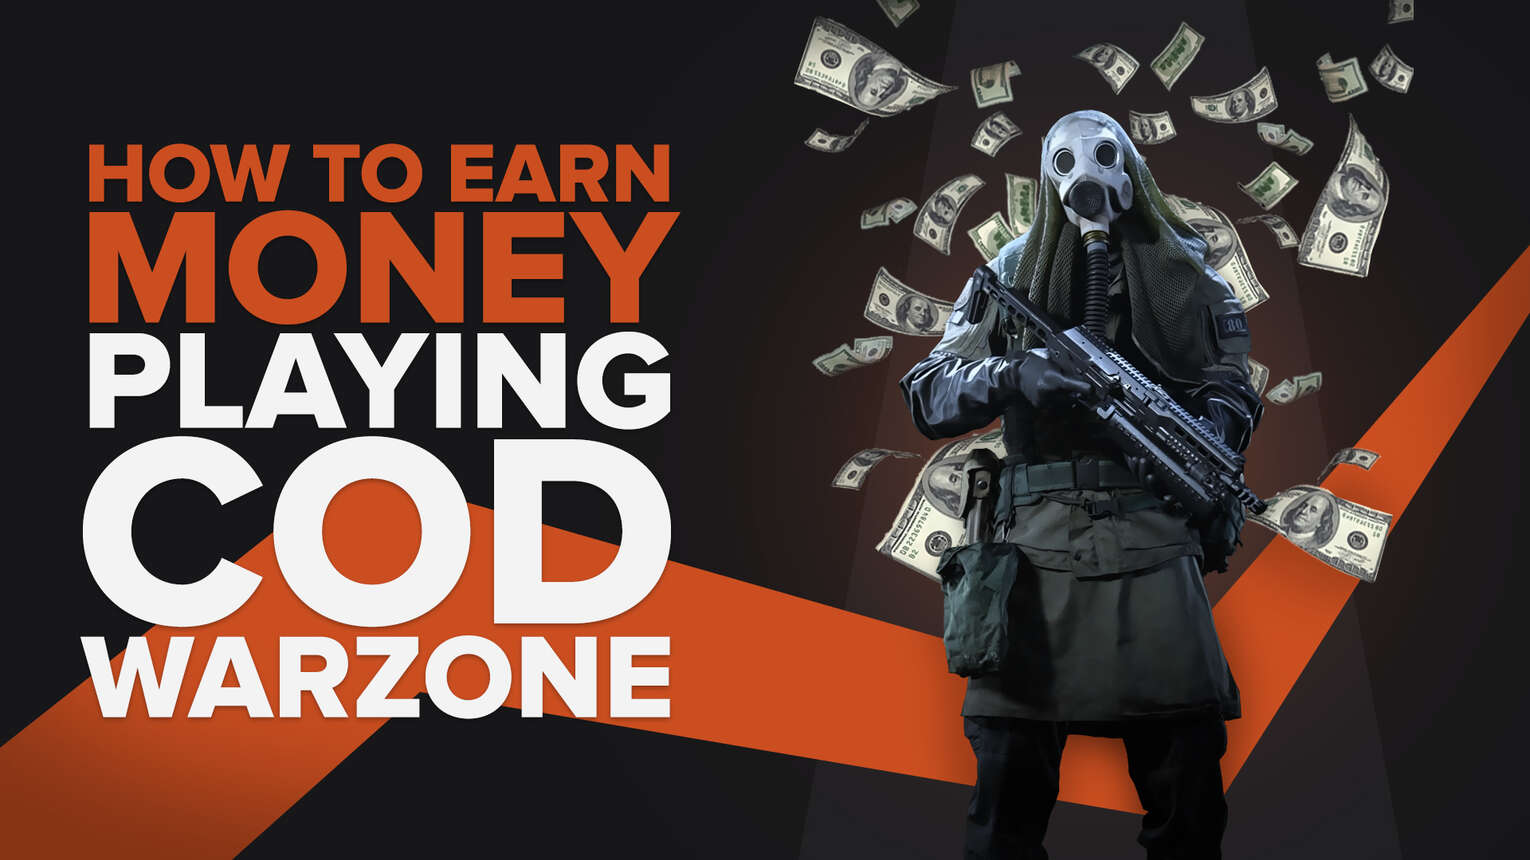 How To Earn Money Playing Call Of Duty Warzone